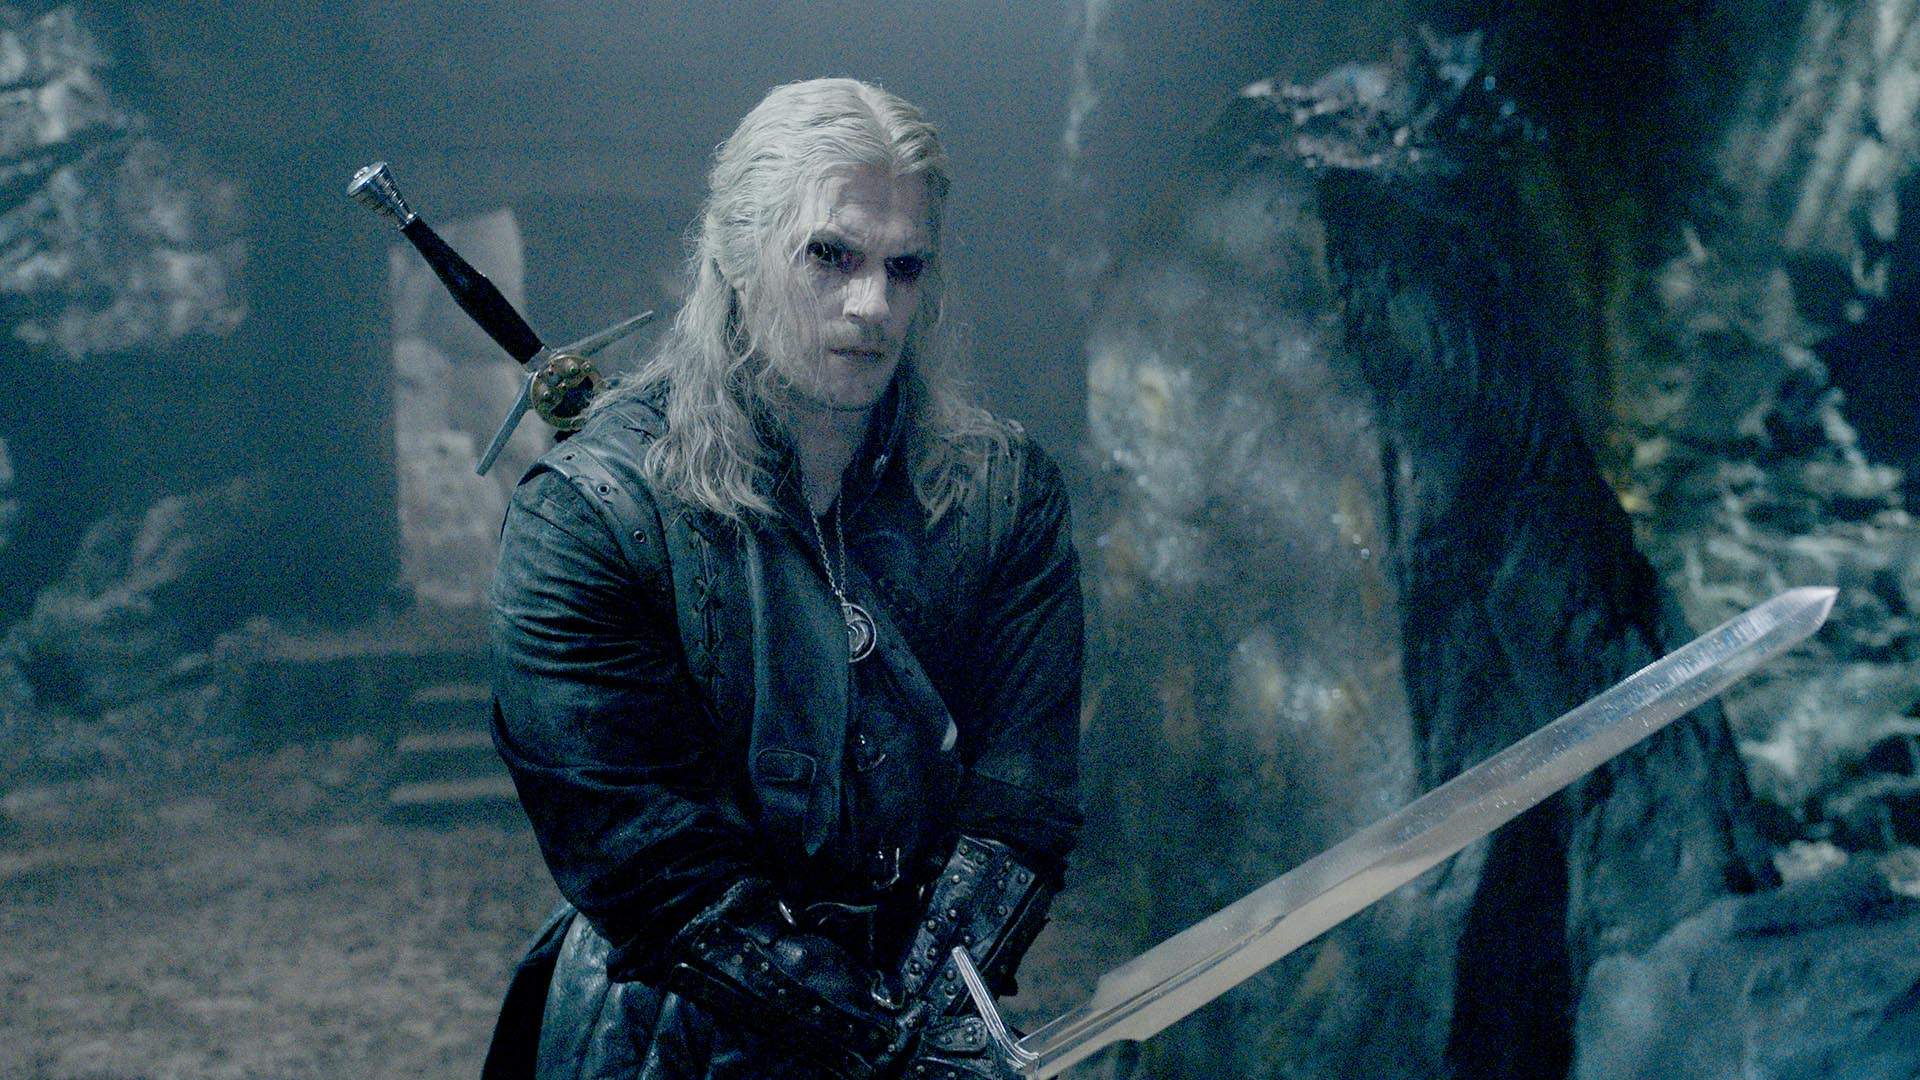 Toss a Coin to Your First Trailer for Henry Cavill's Last Season of 'The Witcher'